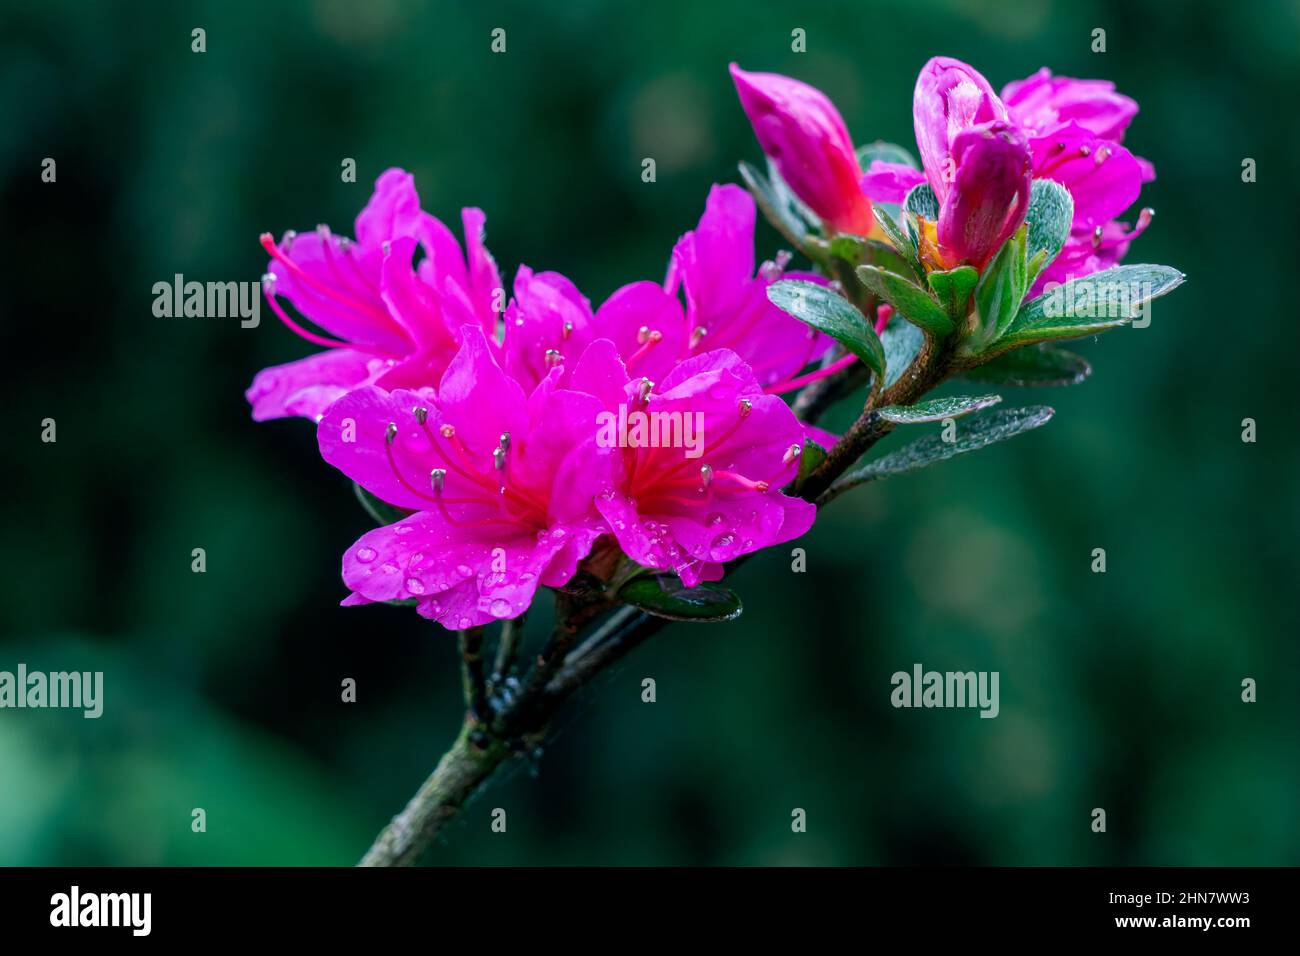 Close-up shot of azalea flowers growing in the garden on a blurred background Stock Photo